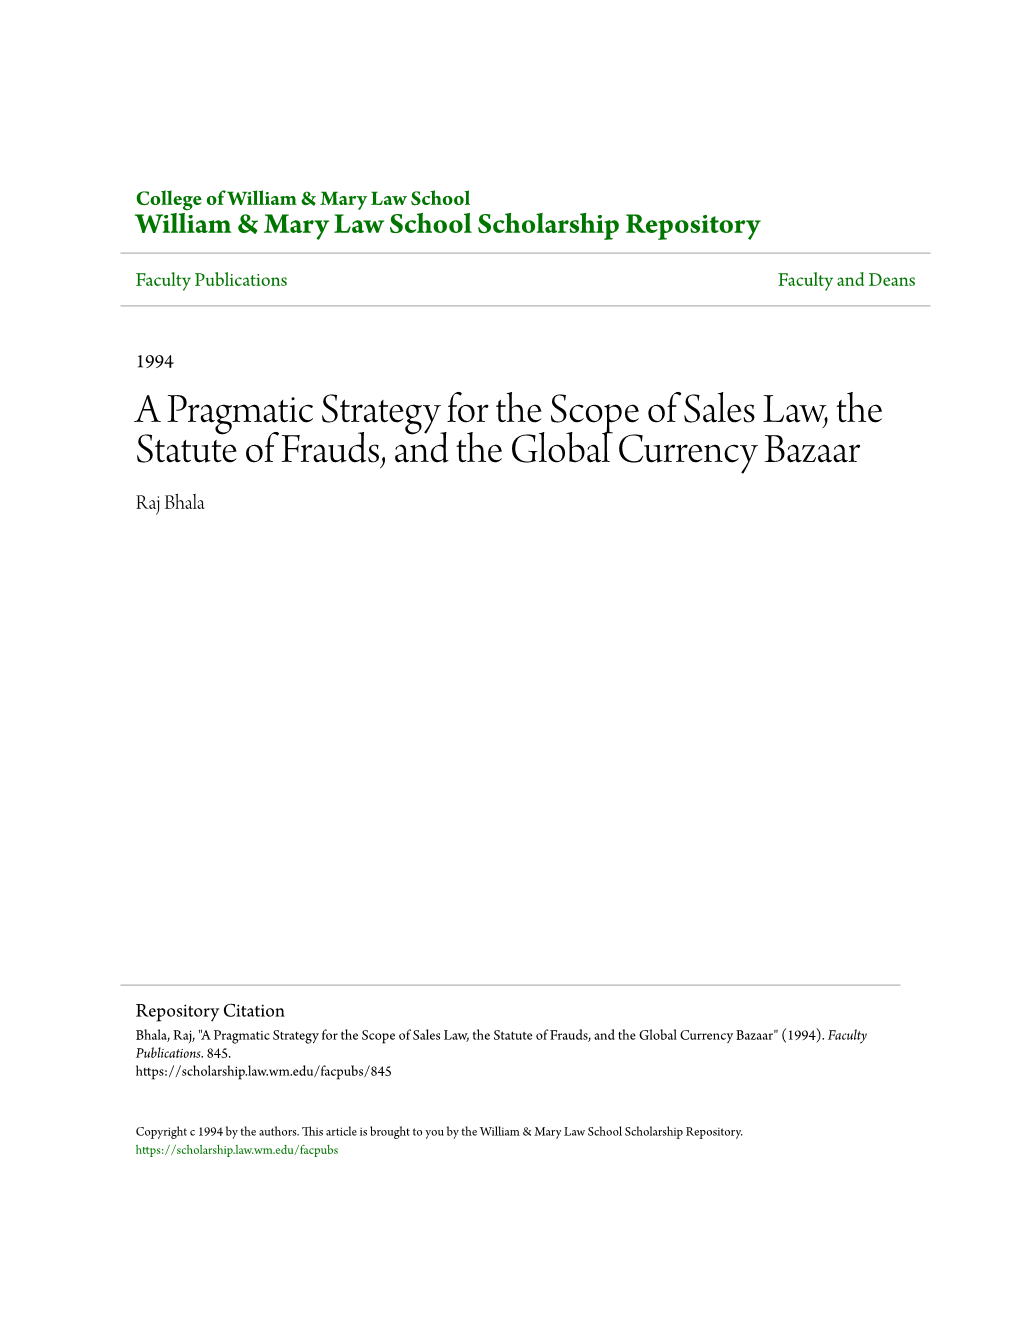 A Pragmatic Strategy for the Scope of Sales Law, the Statute of Frauds, and the Global Currency Bazaar Raj Bhala